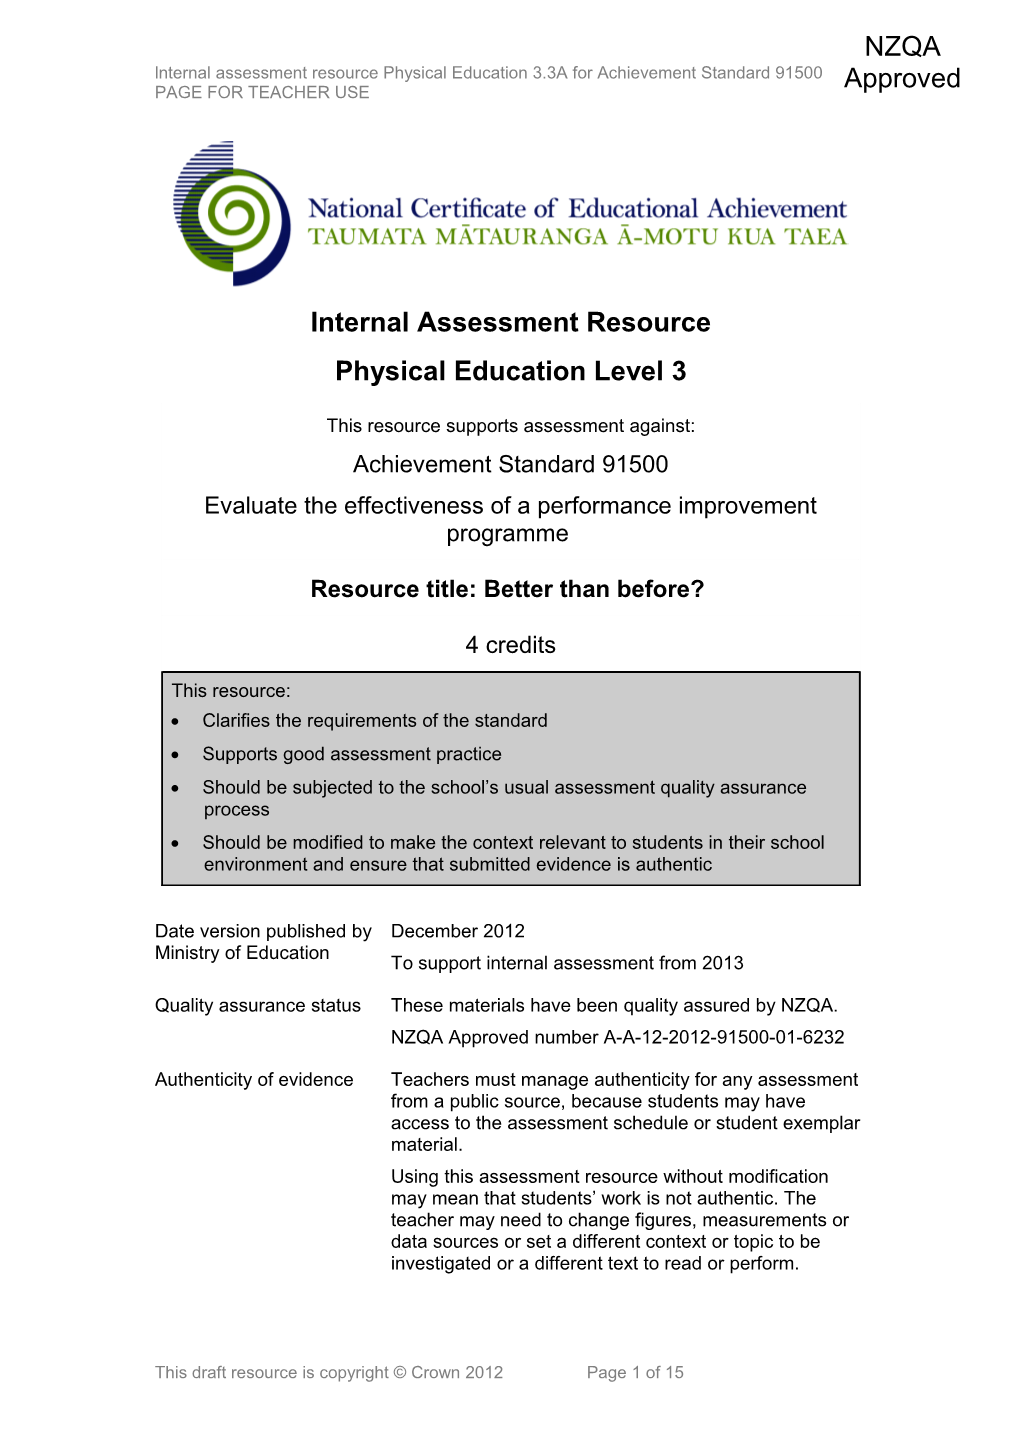 Level 3 Physical Education Internal Assessment Resource